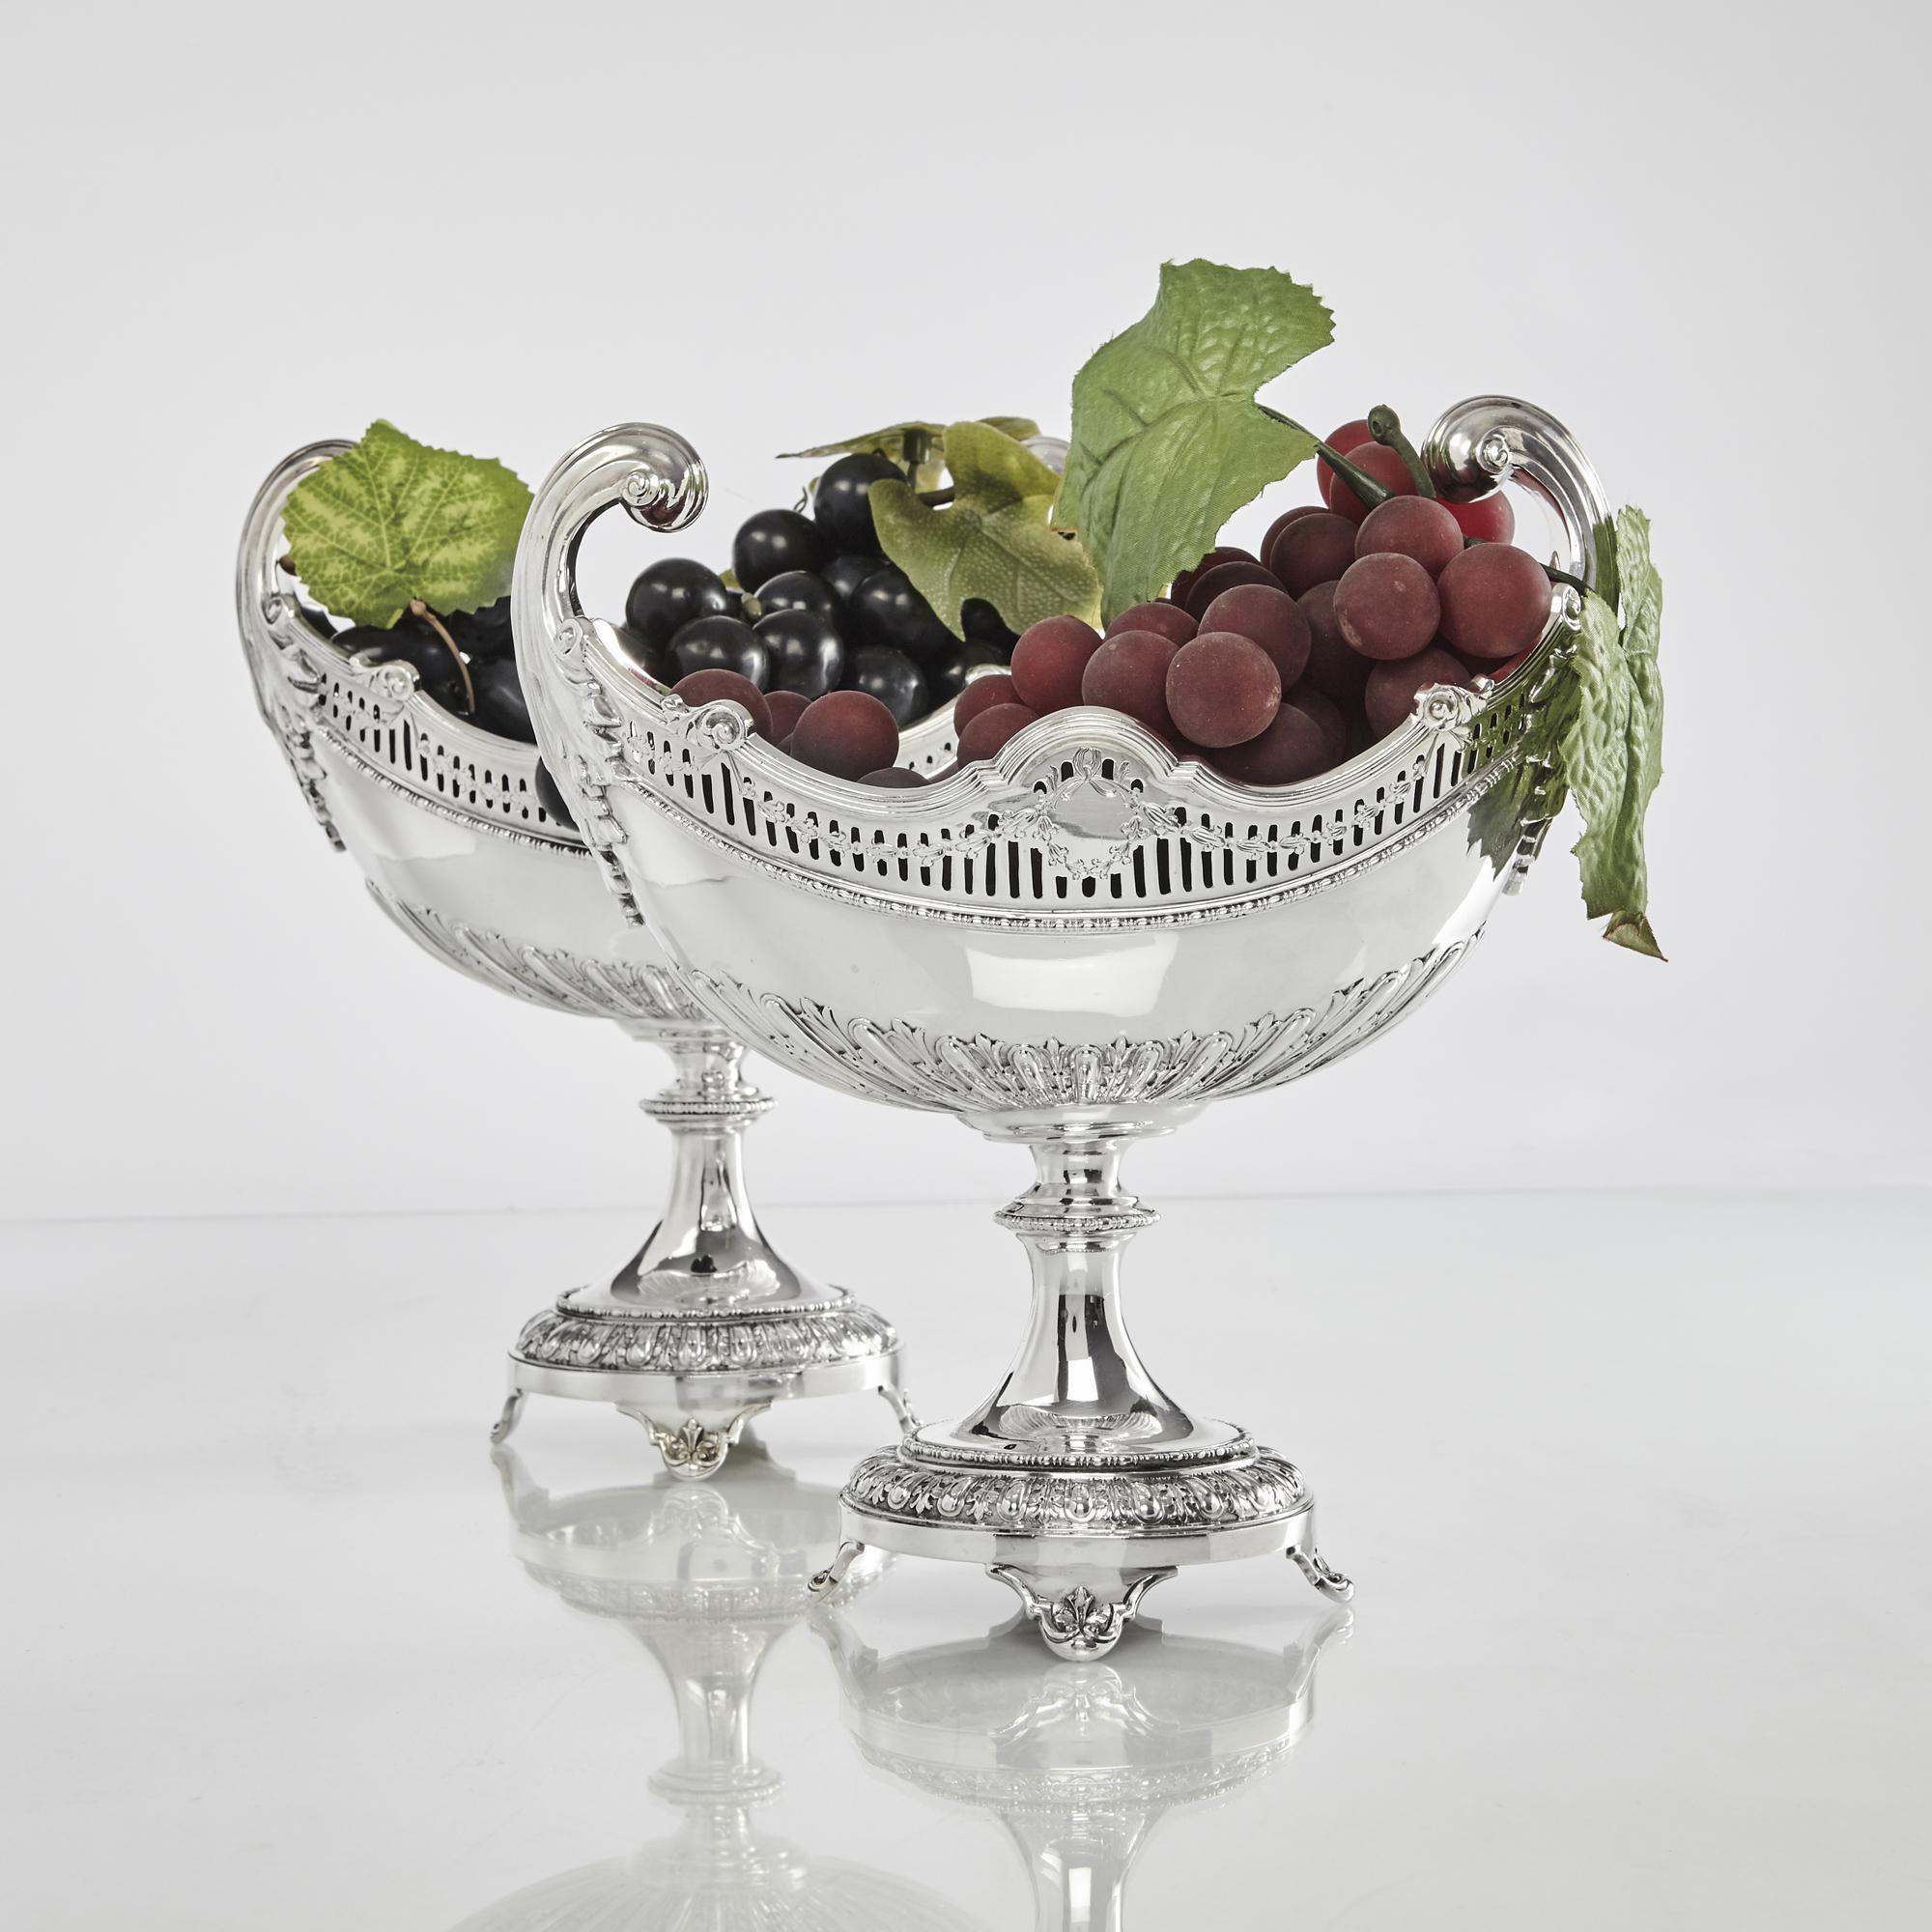 Pair of heavy quality and elegant fruit stands with oval dishes and pedestal bases. With cast scroll and acanthus leaf handles, and decorative fluting to the bottom half, this pair of Edwardian silver bowls are hand-pierced and hand-engraved. They